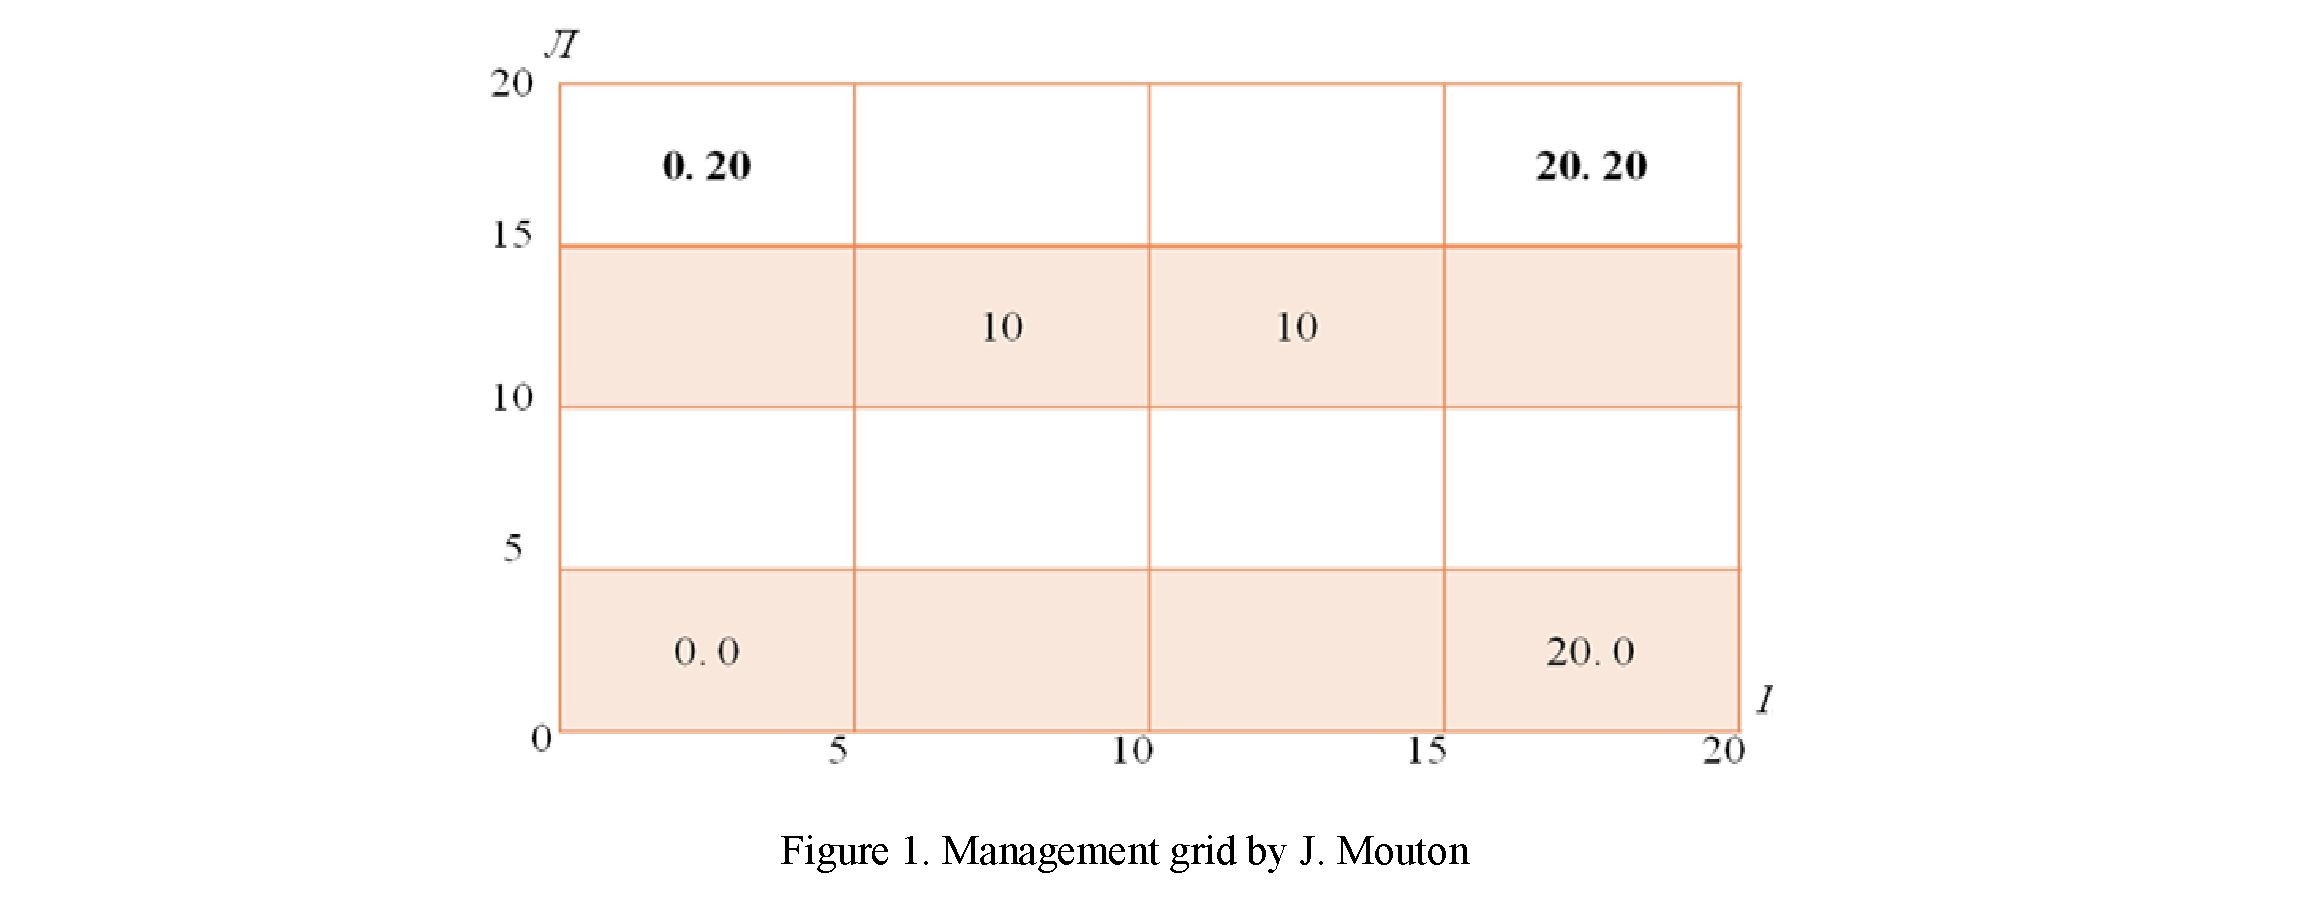 On the effectiveness of the combined managerial style of a modern general education school